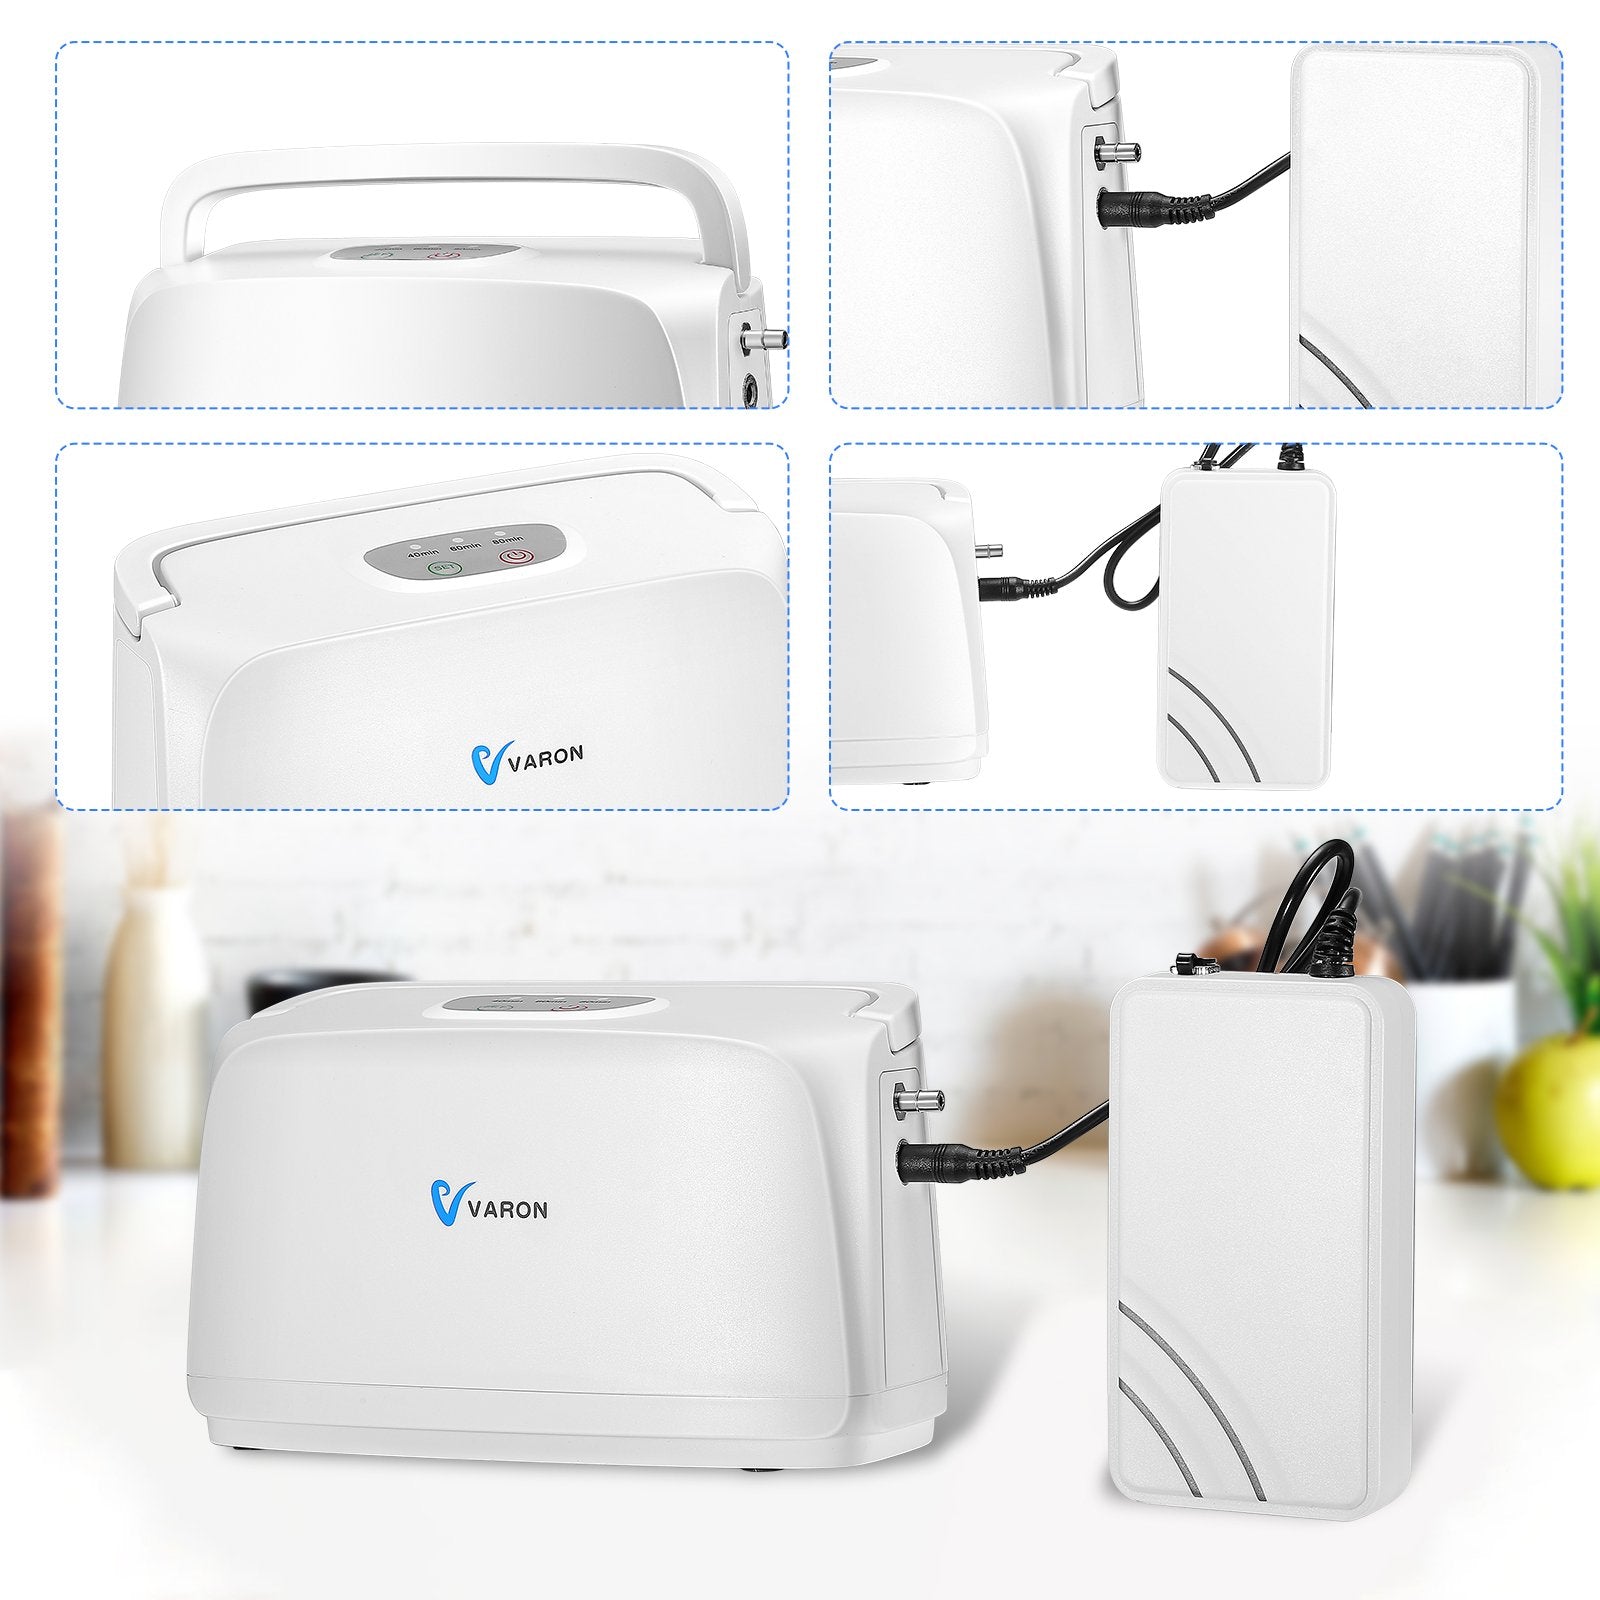 In Stock 3L/min Portable Oxygen Concentrator NT-03-OXYGENSOLVE